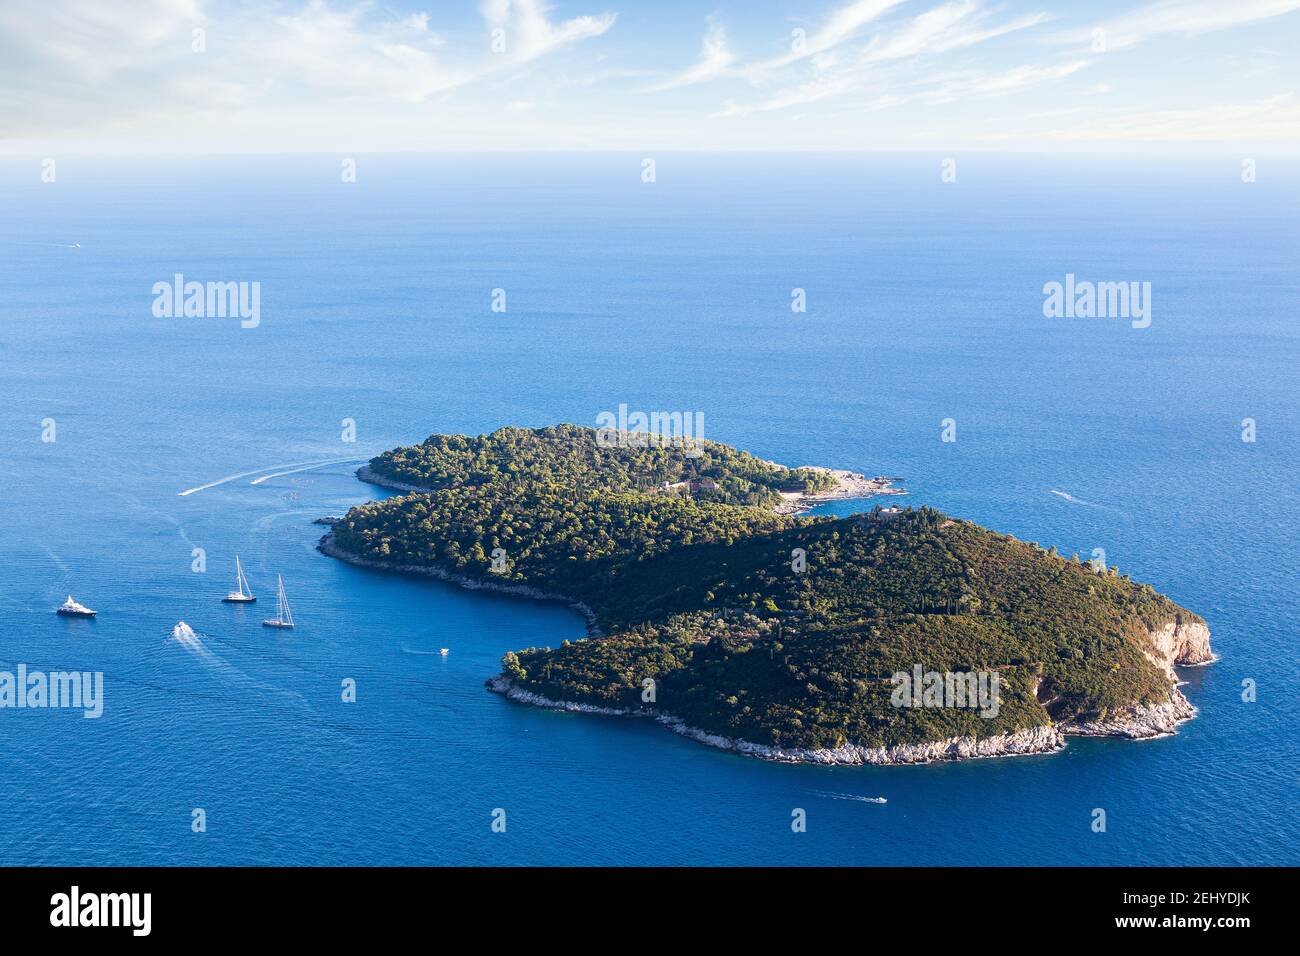 A Beautiful Green Island Lokrum Near Dubrovnik Surrounded by a Big Blue Sea, Sailboats, Boats and a Yacht Stock Photo